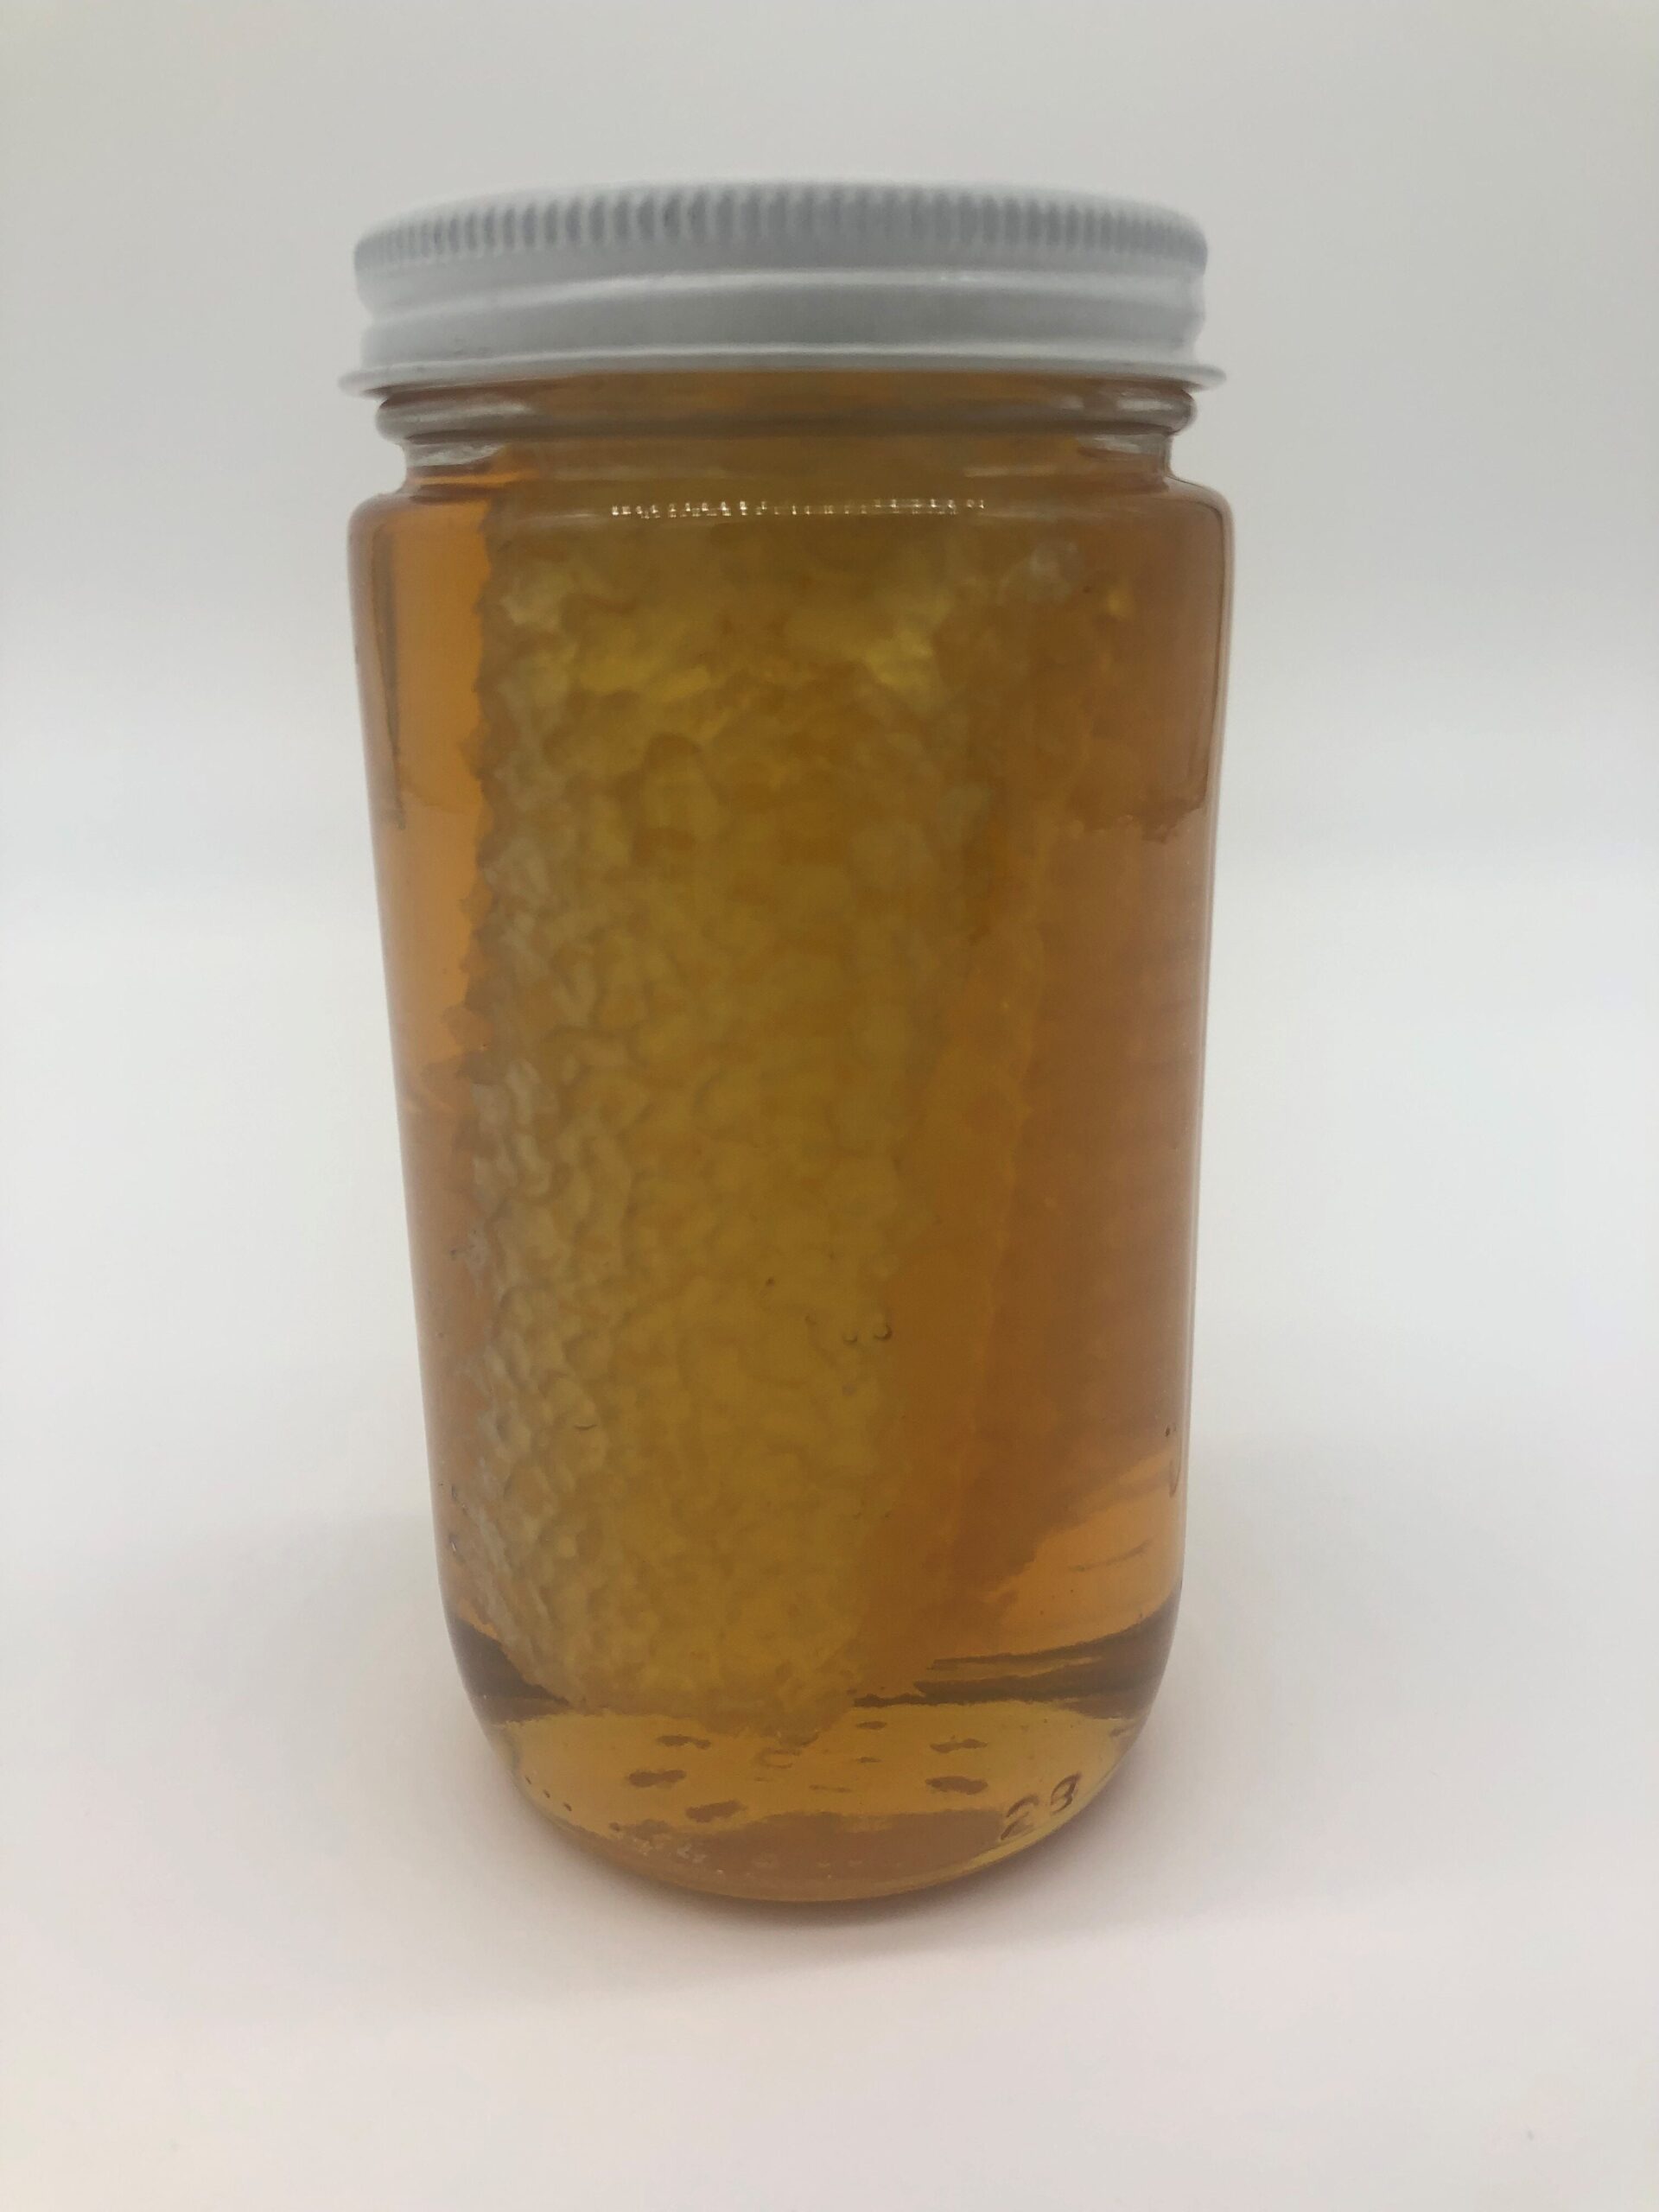 Cut Comb Honey Containers: Perfect For Comb Honey & Displaying Honeycombs